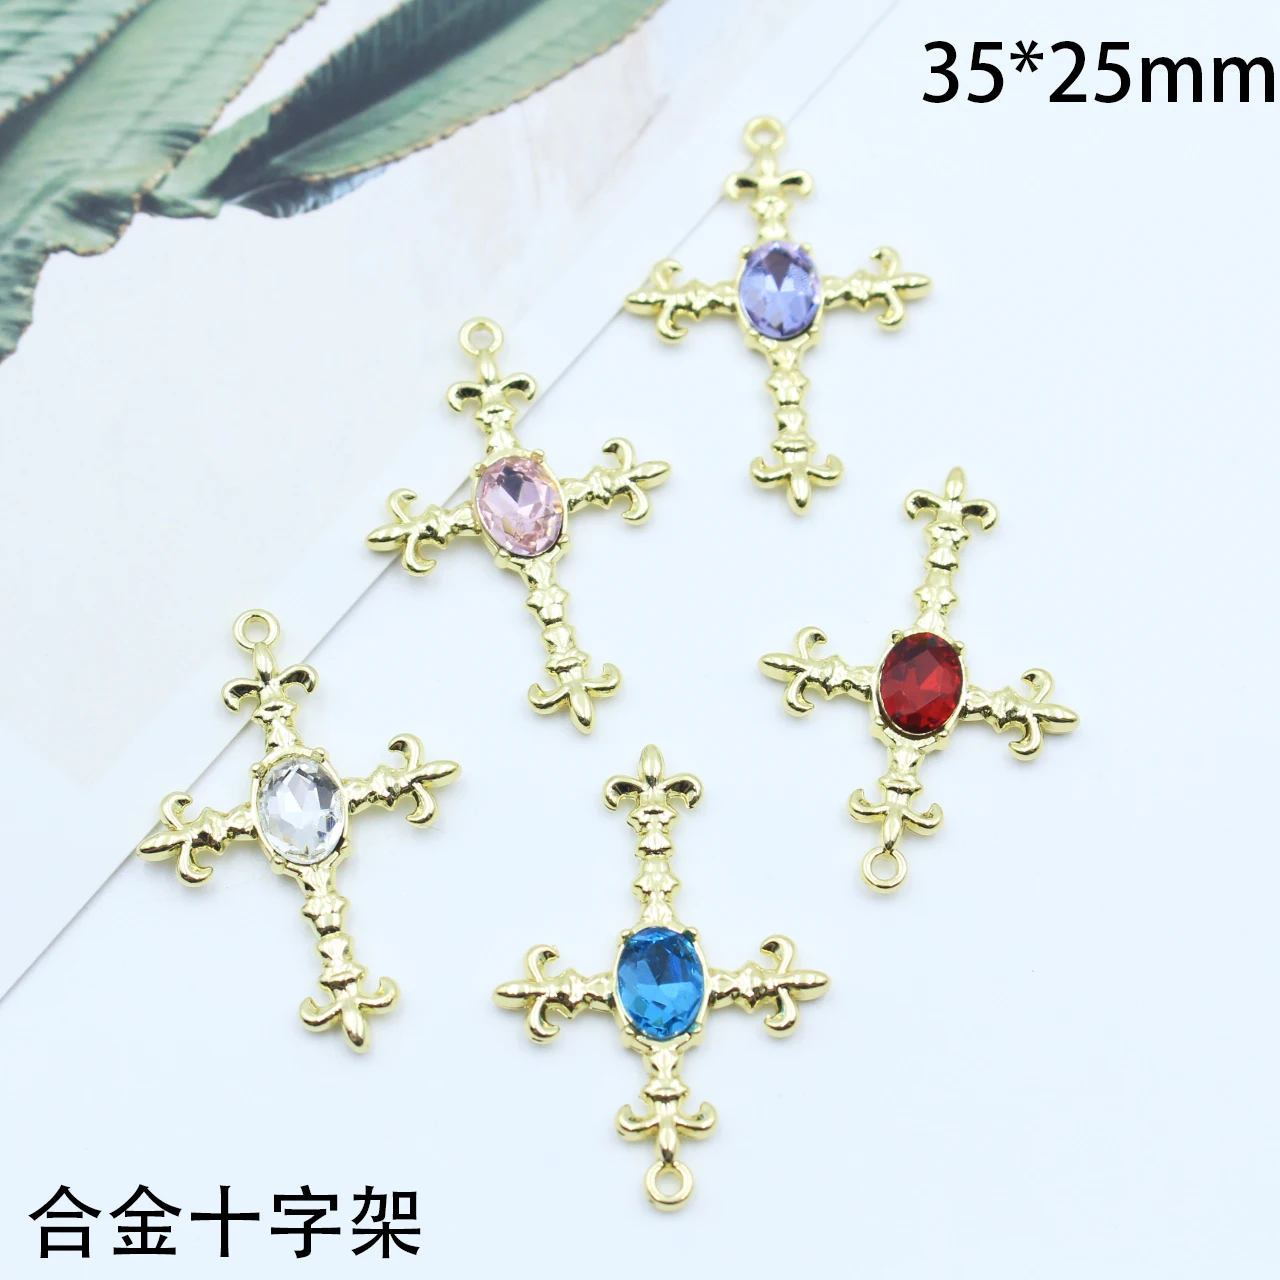 

New 5 Pcs/Lot Alloy Cross Small Pendant DIY Earrings Nail Enhancement Jewelry Keychain Glass Decoration Costura Accessories